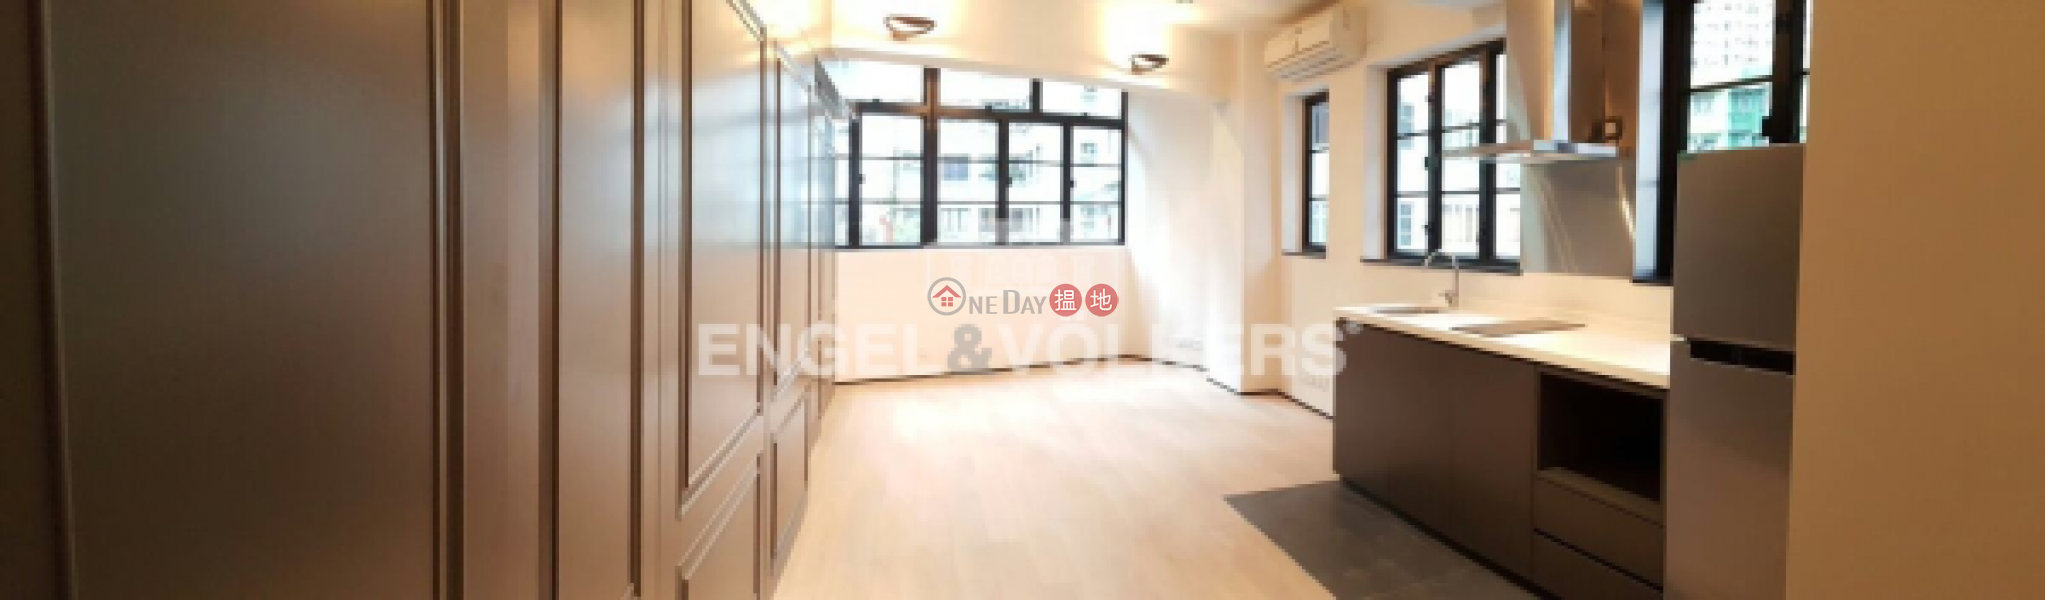 Property Search Hong Kong | OneDay | Residential Rental Listings 1 Bed Flat for Rent in Soho